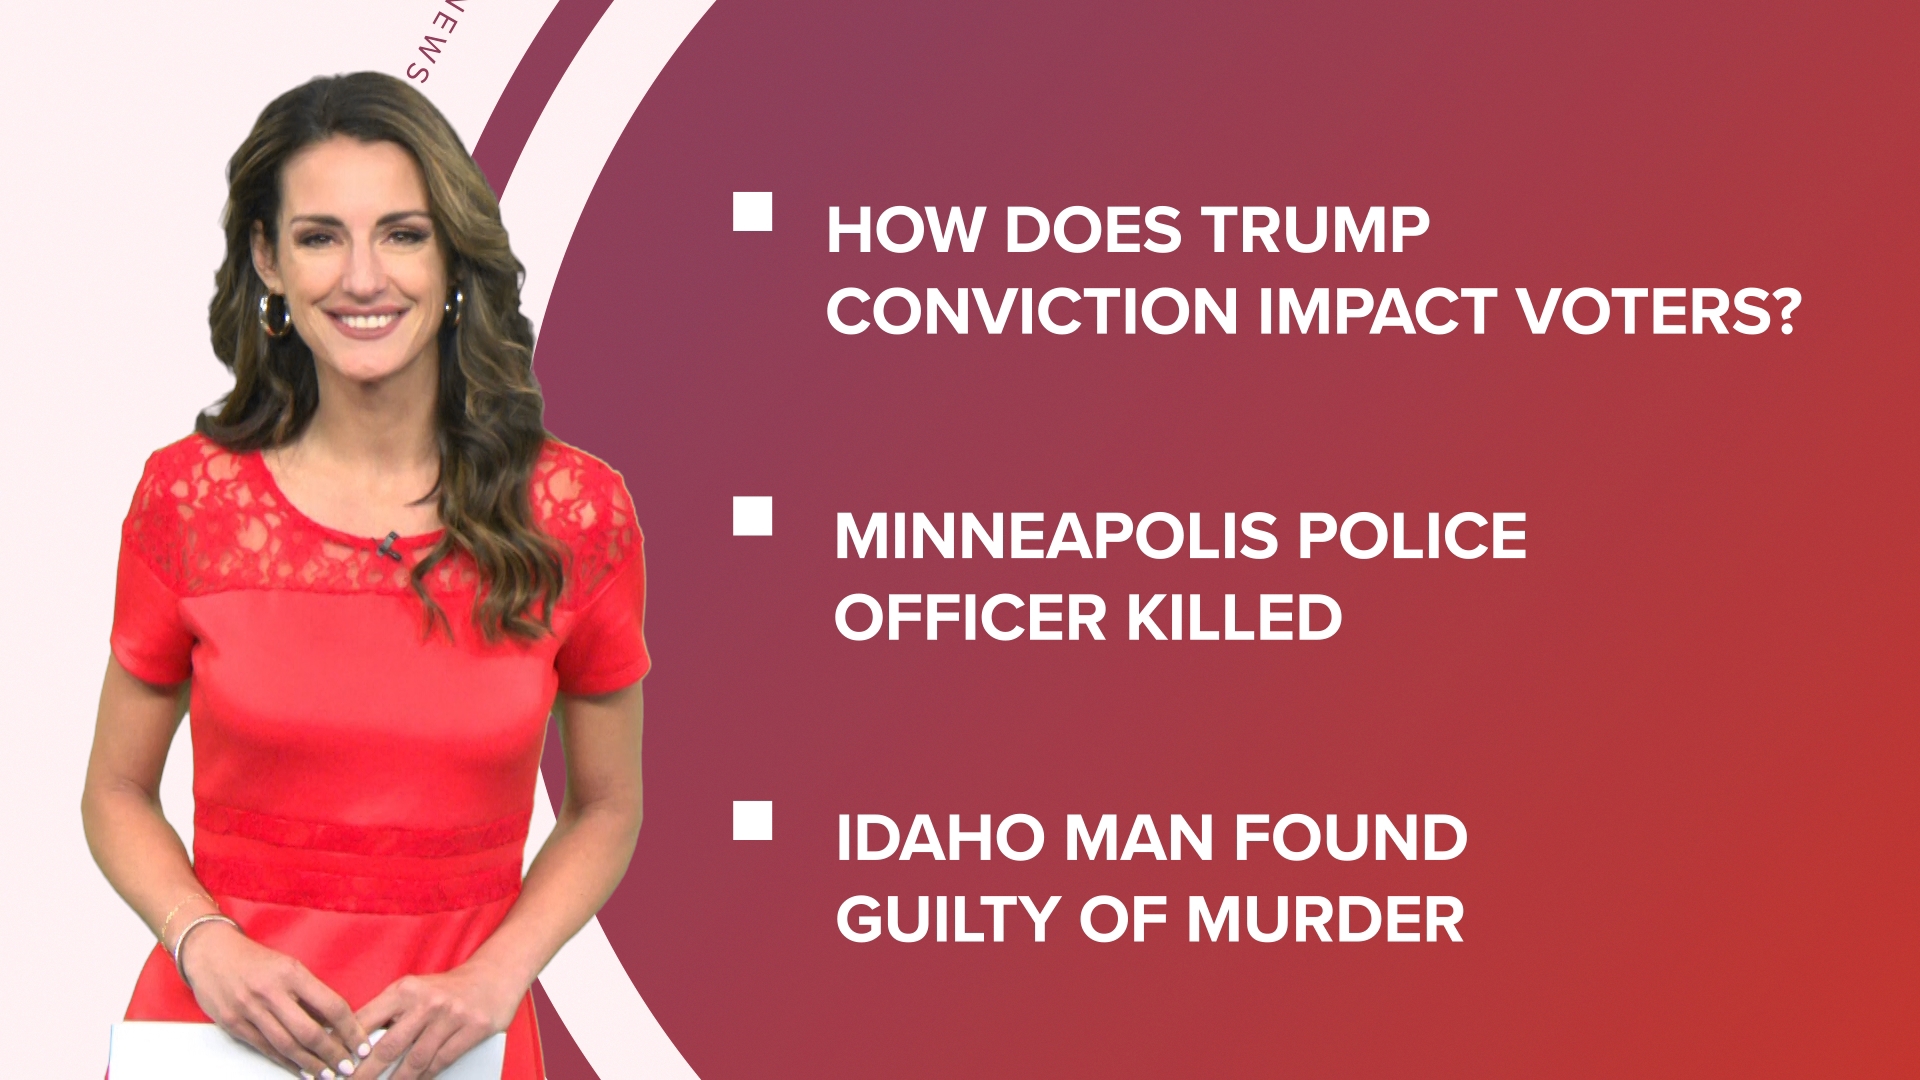 A look at what is happening in the news from Trump found guilty on all counts in hush money case to Chad Daybell found guilty of murder and new spelling bee winner.